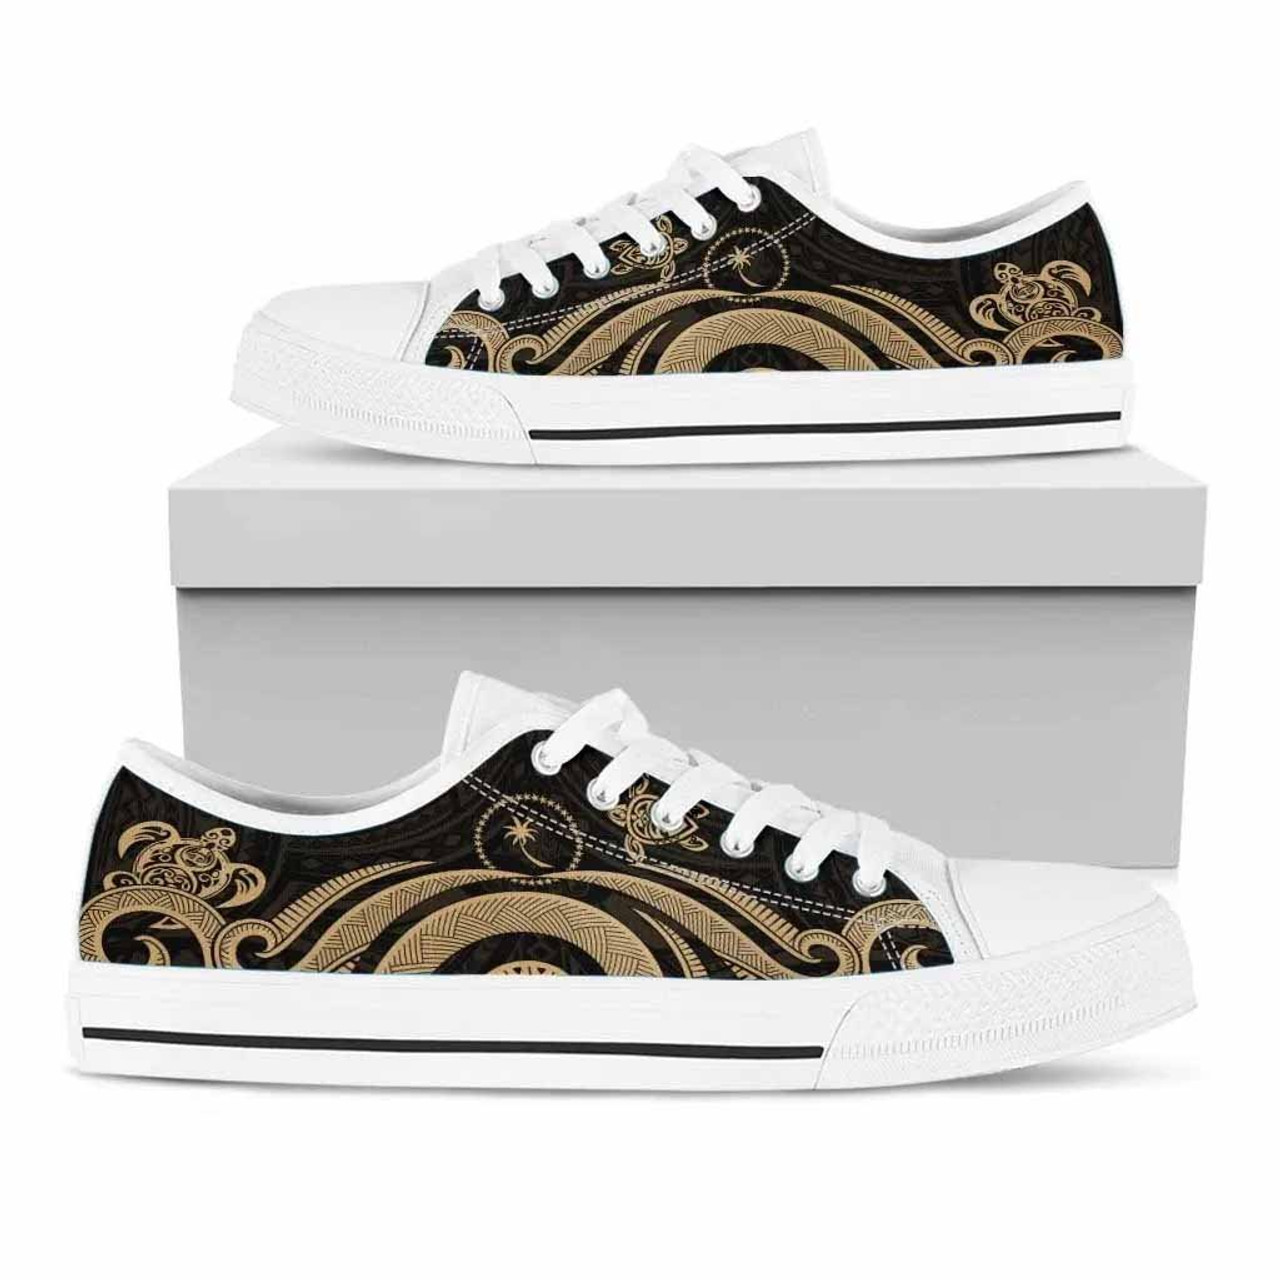 Chuuk Low Top Shoes - Gold Tentacle Turtle 6